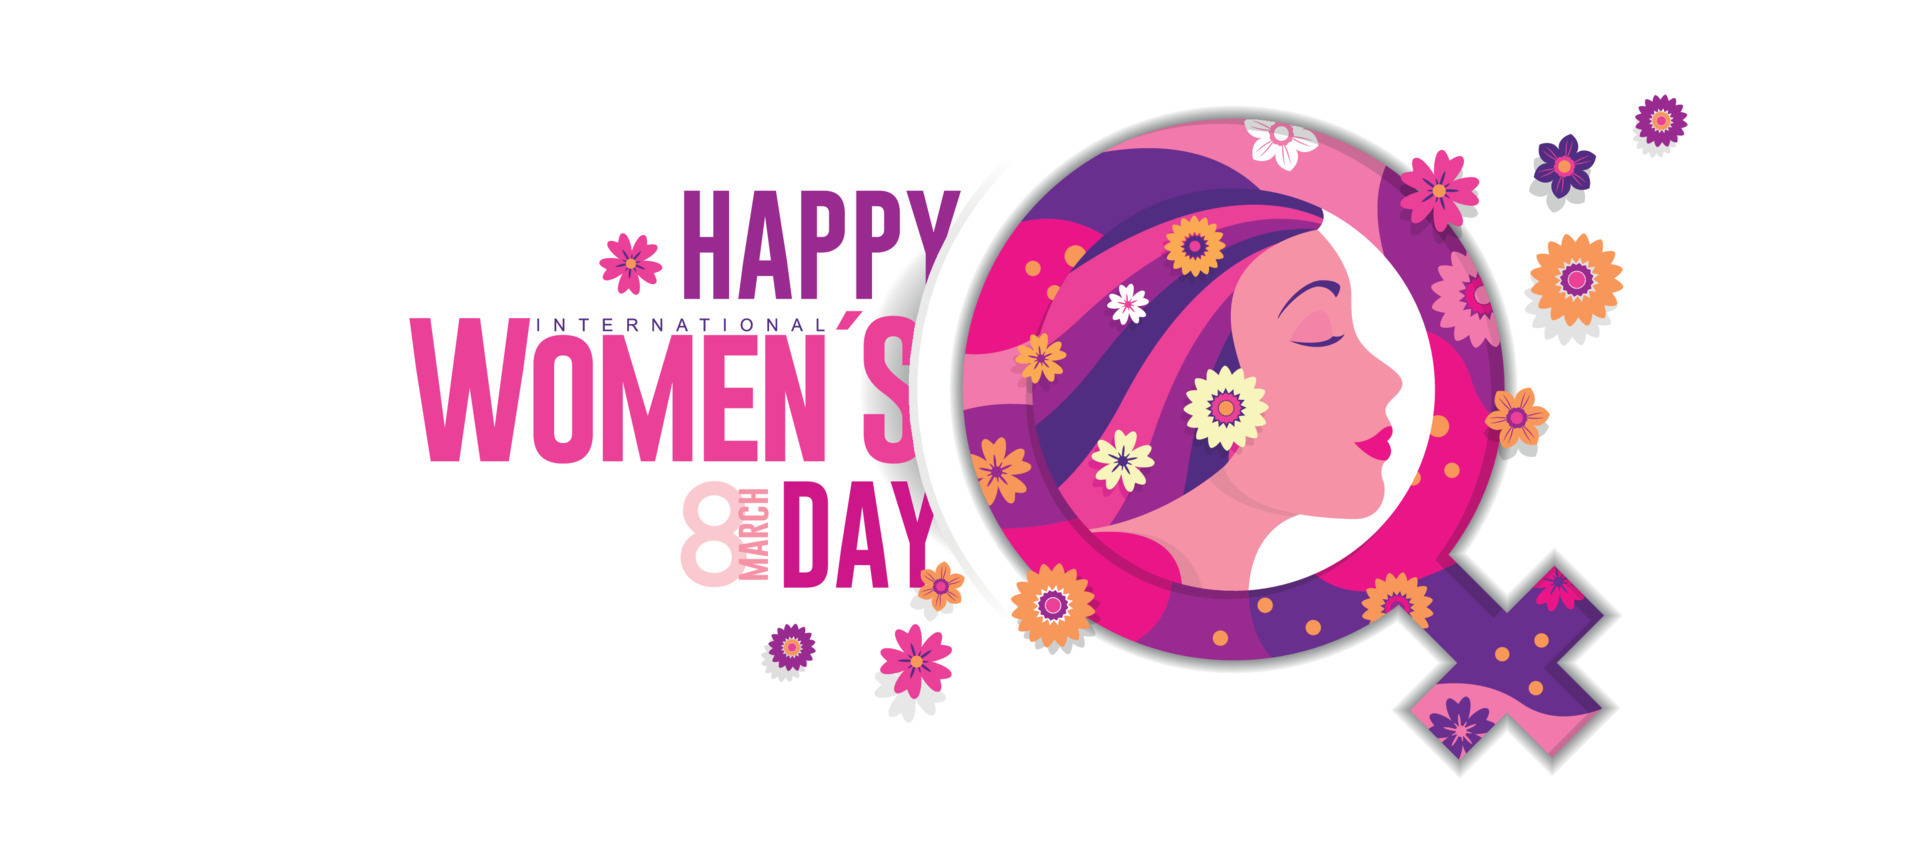 INTERNATIONAL WOMEN S DAY Greeting Card. Woman's face in profile ...